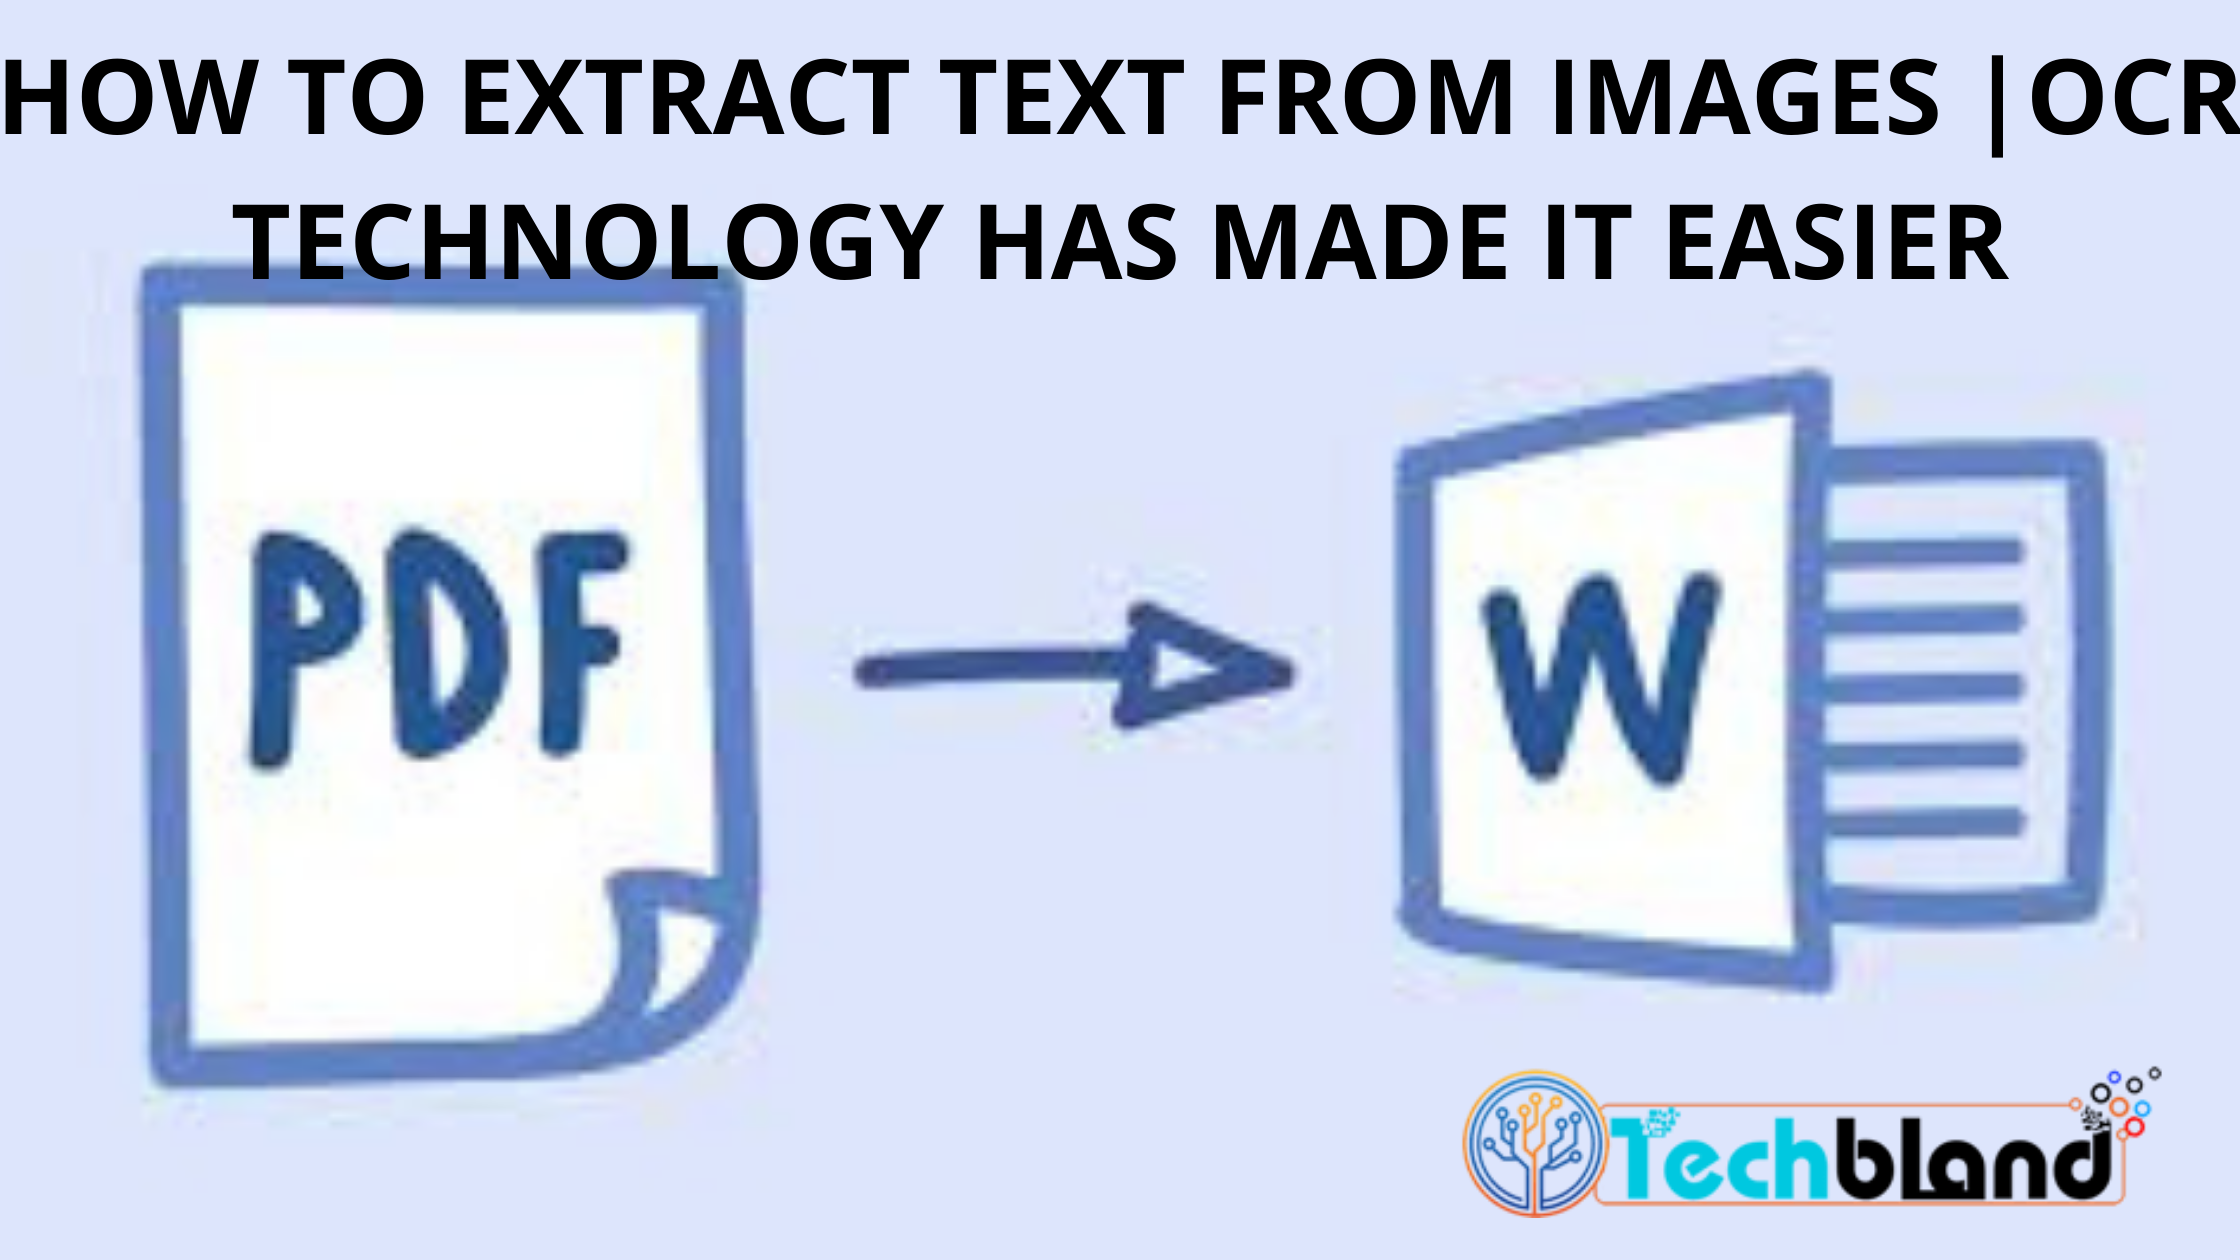 HOW TO EXTRACT TEXT FROM IMAGES OCR TECHNOLOGY HAS MADE IT EASIER